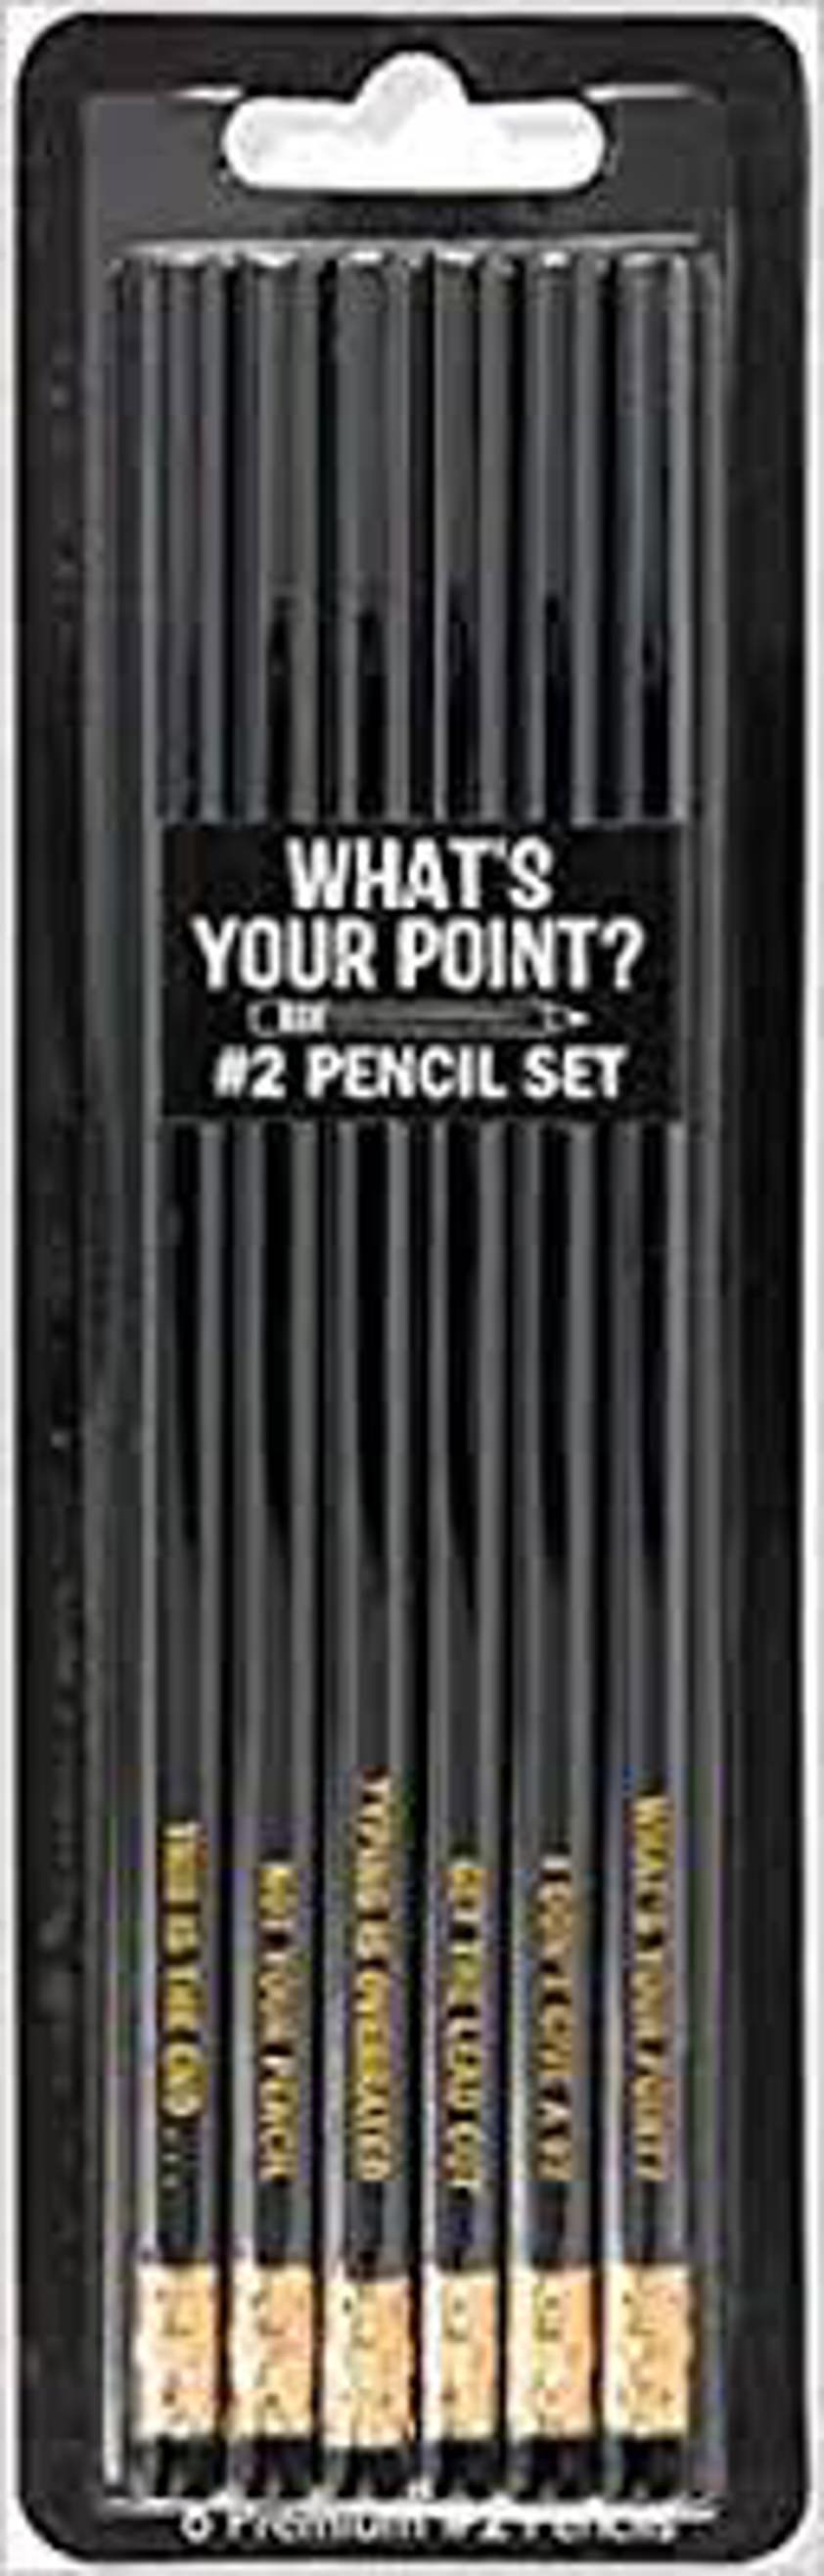 Pencil Set WhatS Your Point?